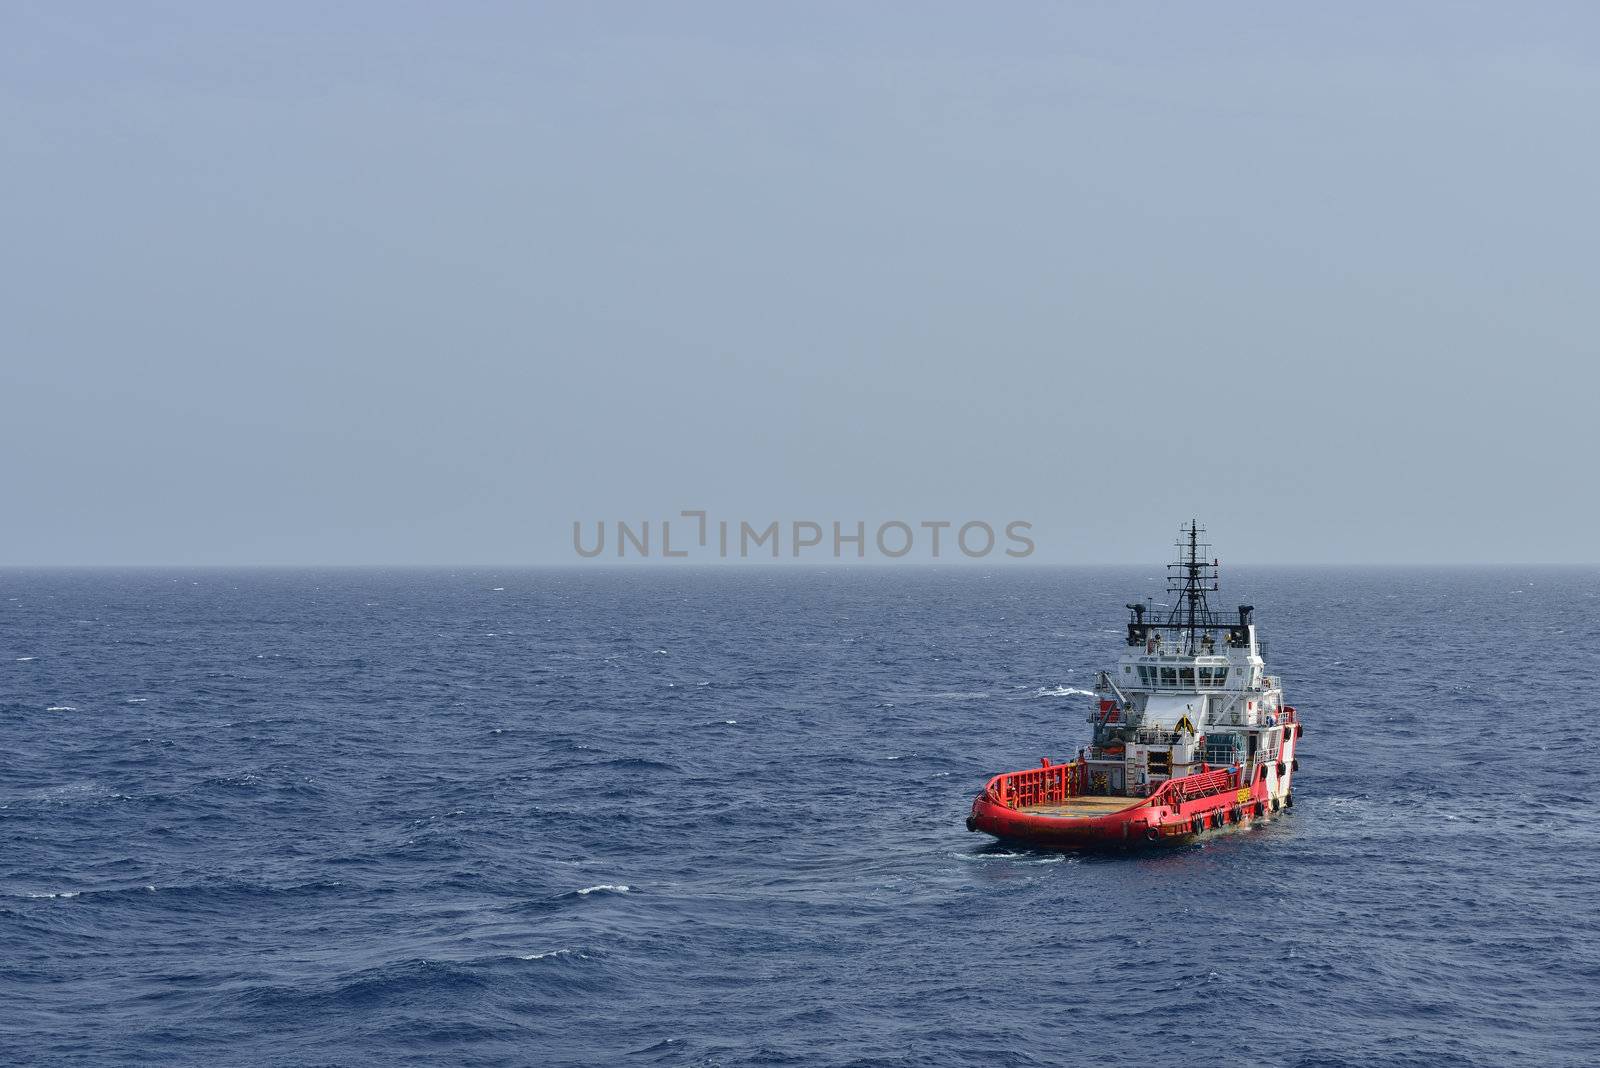 The rescue and supply boat for offshore oil rig operation.